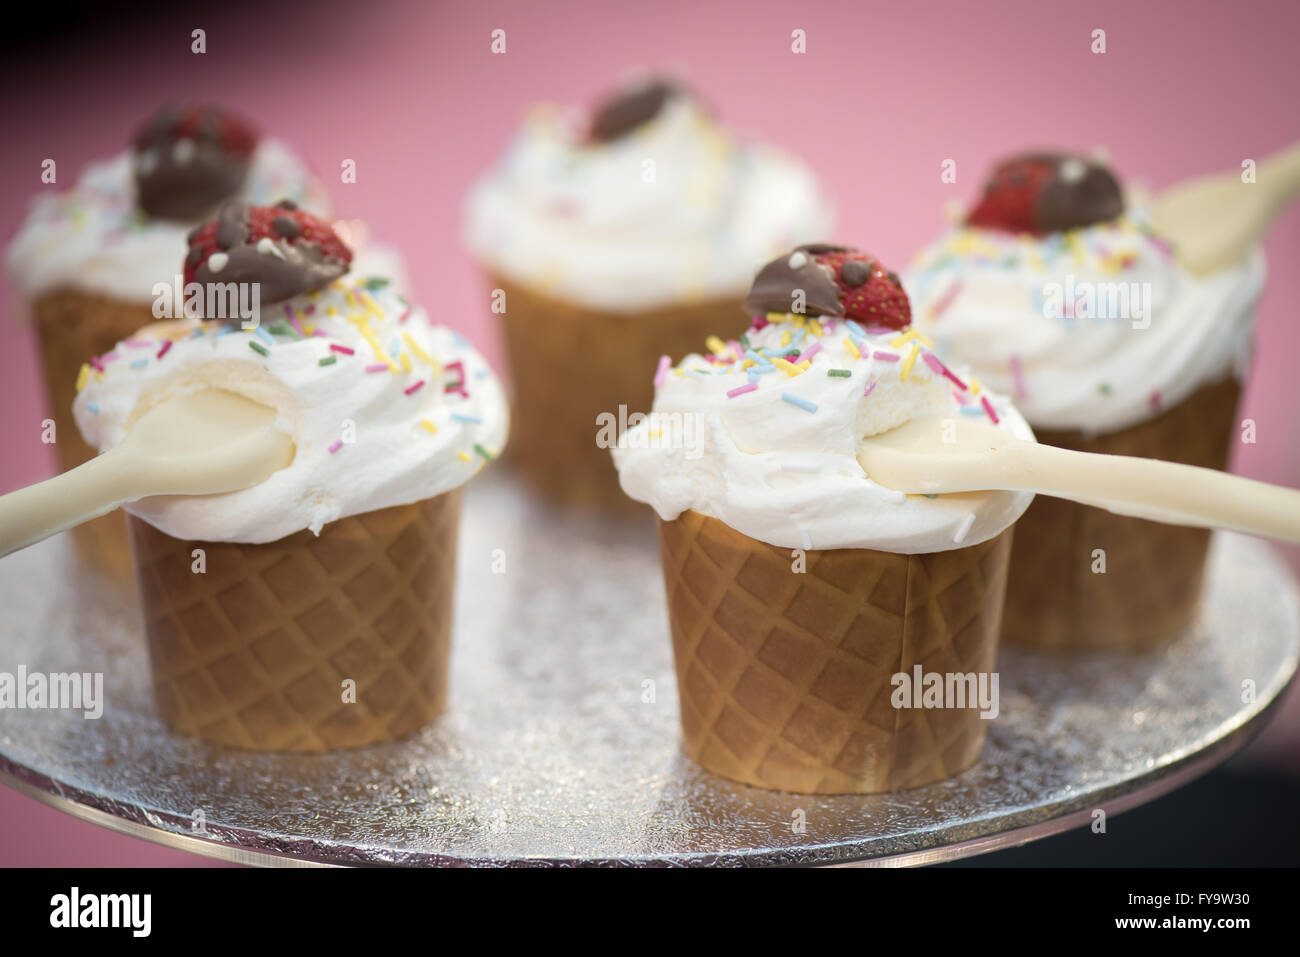 Vanilla ice cream cone with sprinkle cupcakes at Cake International – The Sugarcraft, Cake Decorating and Baking Show in London. Stock Photo